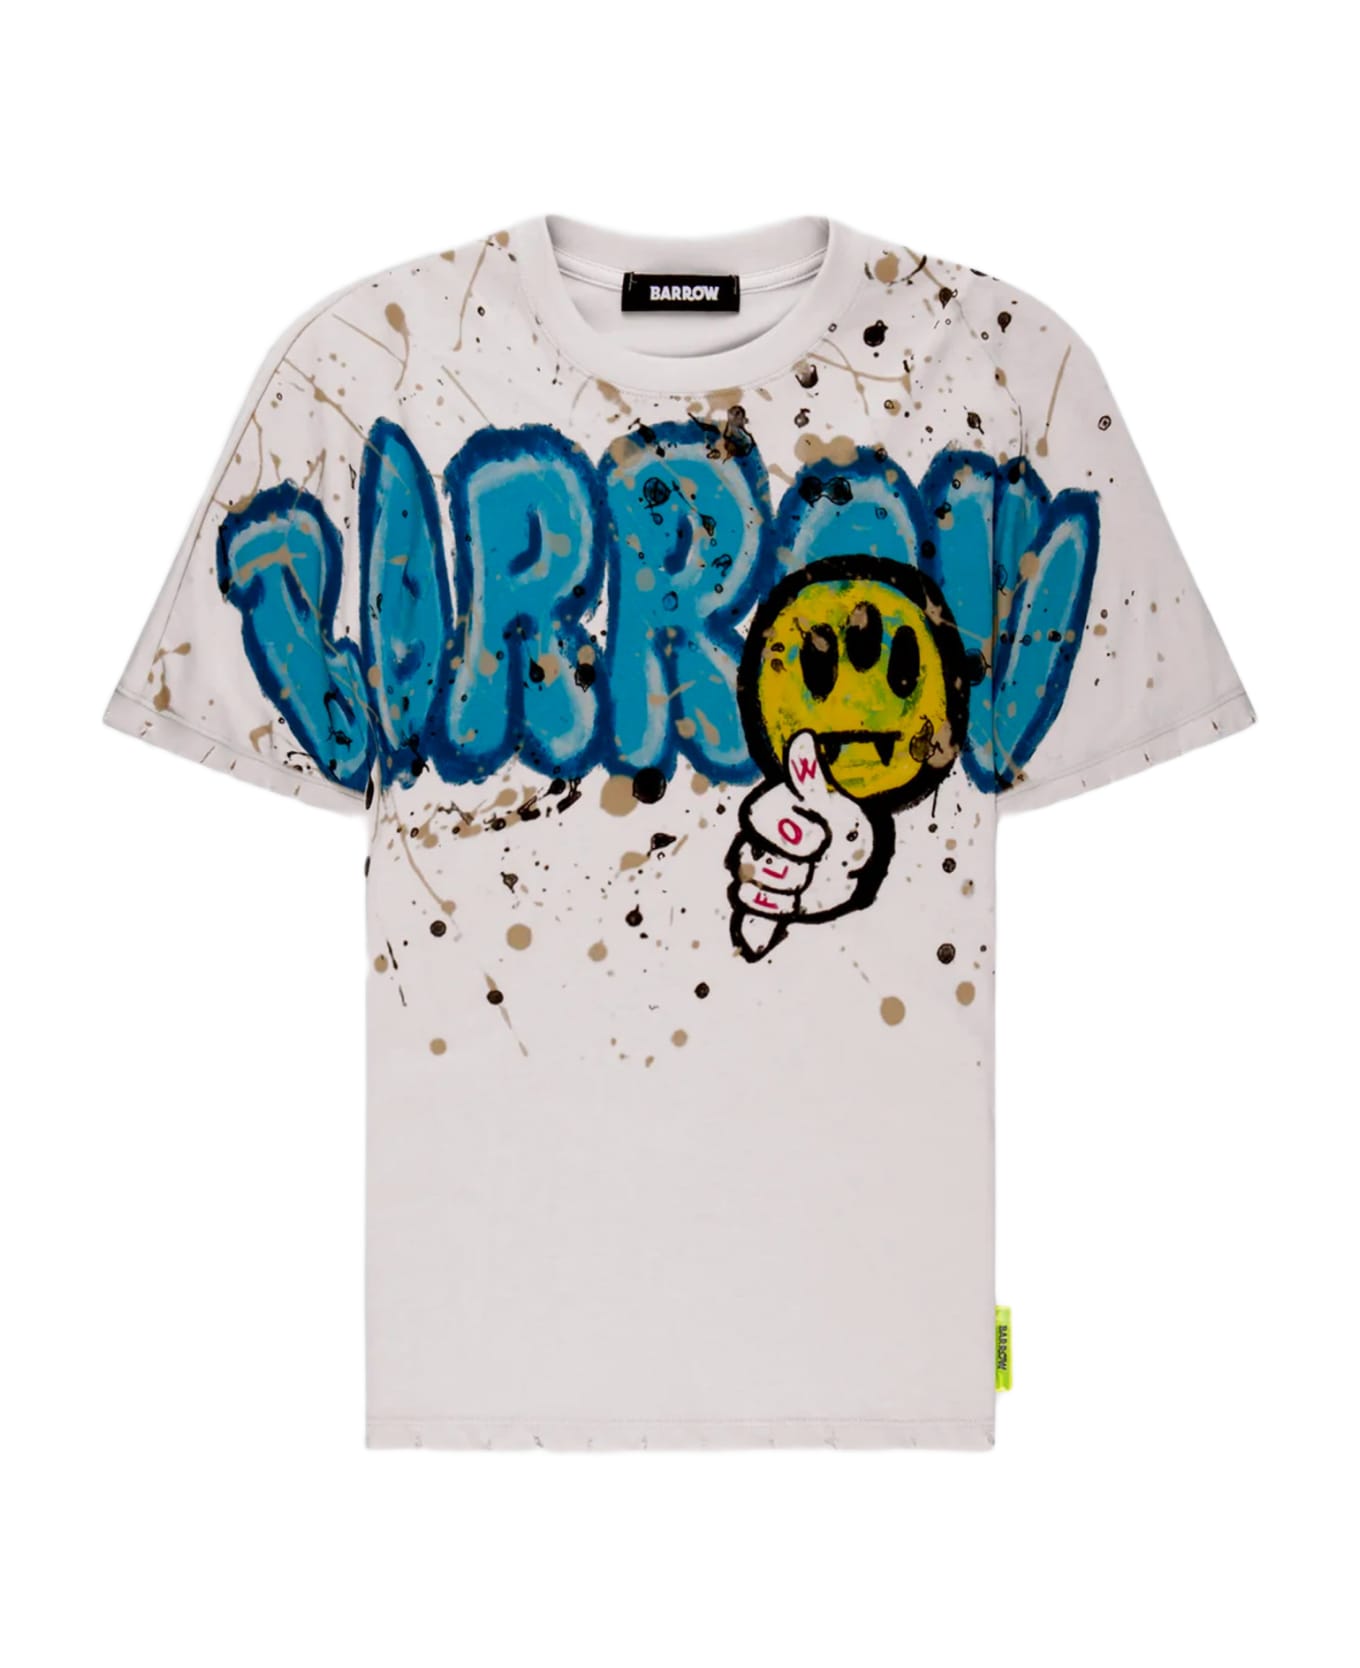 Barrow Jersey T-shirt Unisex Off White Cotton T-shirt With Graffiti Logo And Smile Print - Beige シャツ